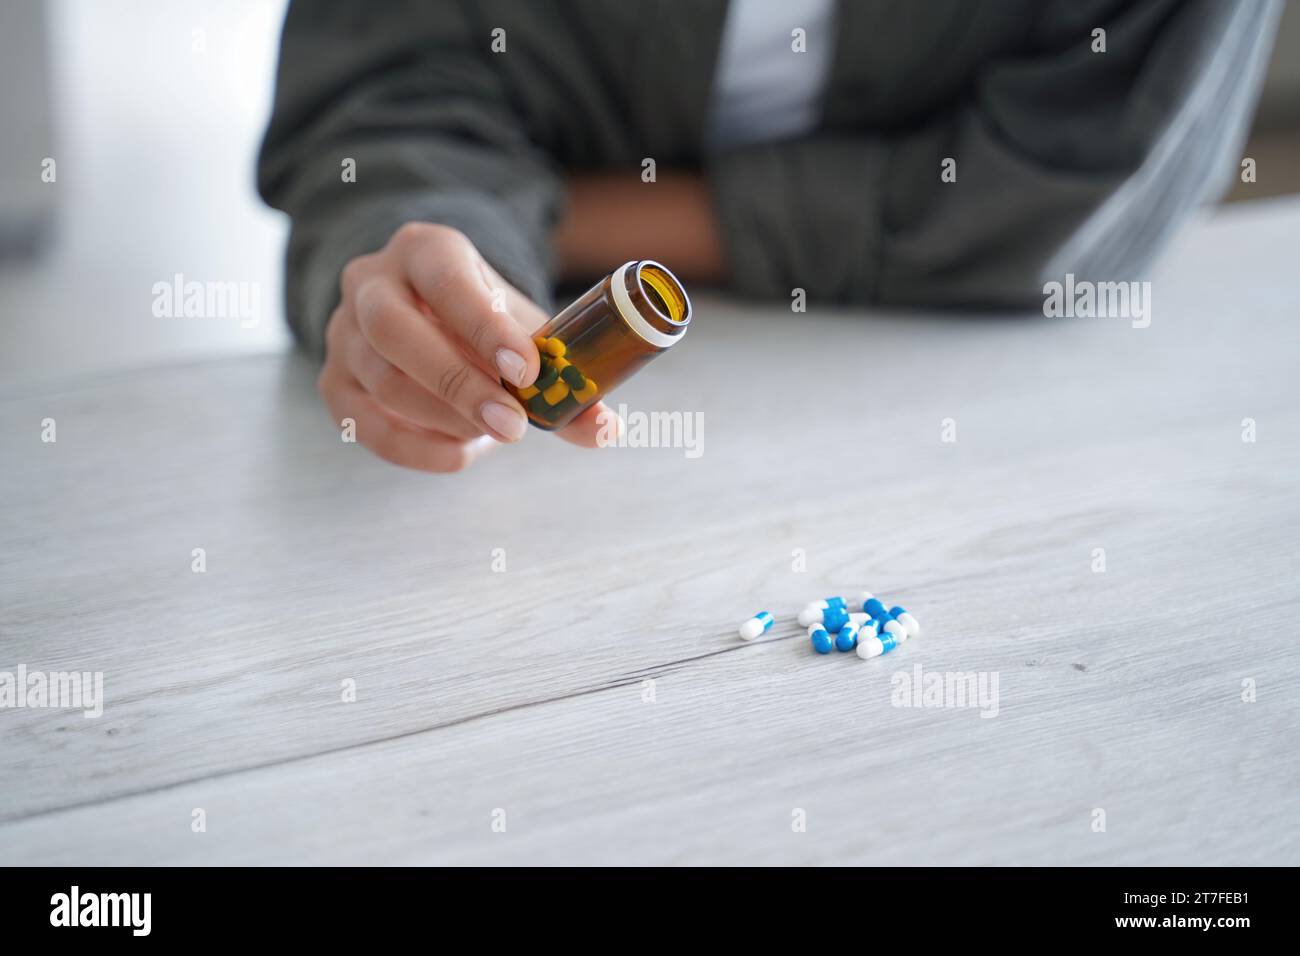 https://c8.alamy.com/comp/2T7FEB1/hand-pouring-out-pills-from-a-bottle-a-concept-of-medication-management-2T7FEB1.jpg